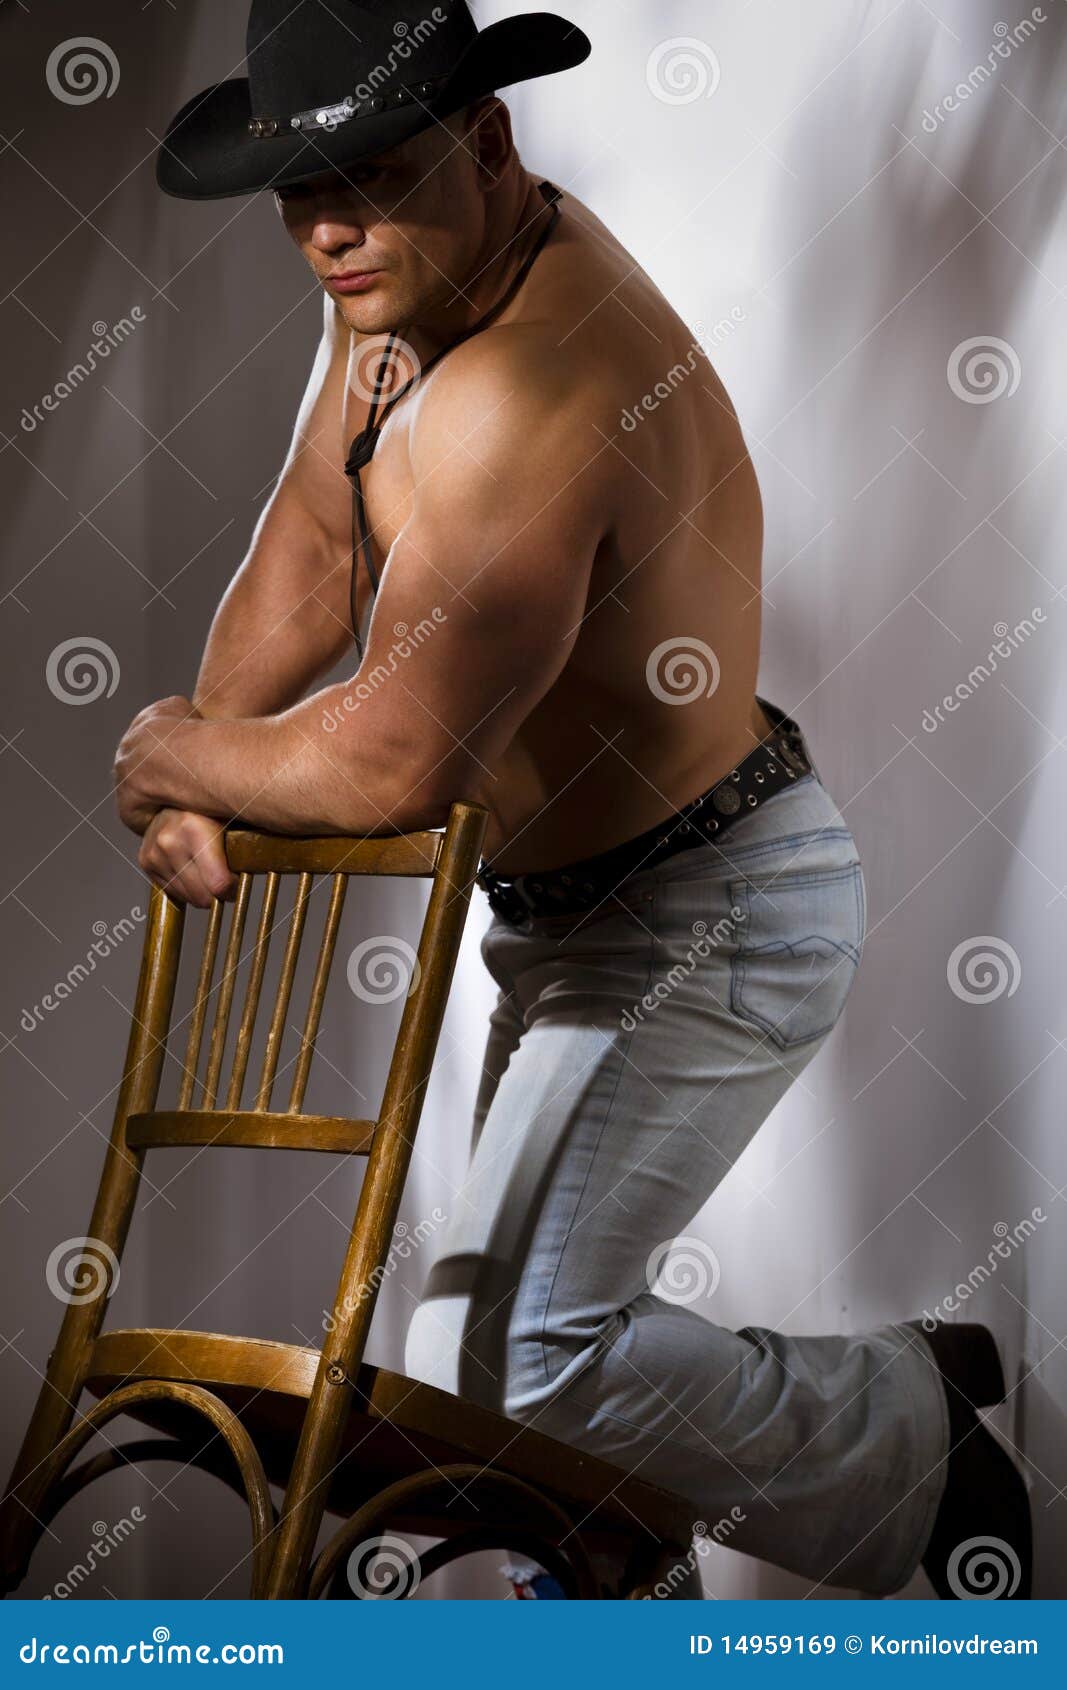 Photo about Muscular shirtless cowboy leaning on chair against a white wall. 